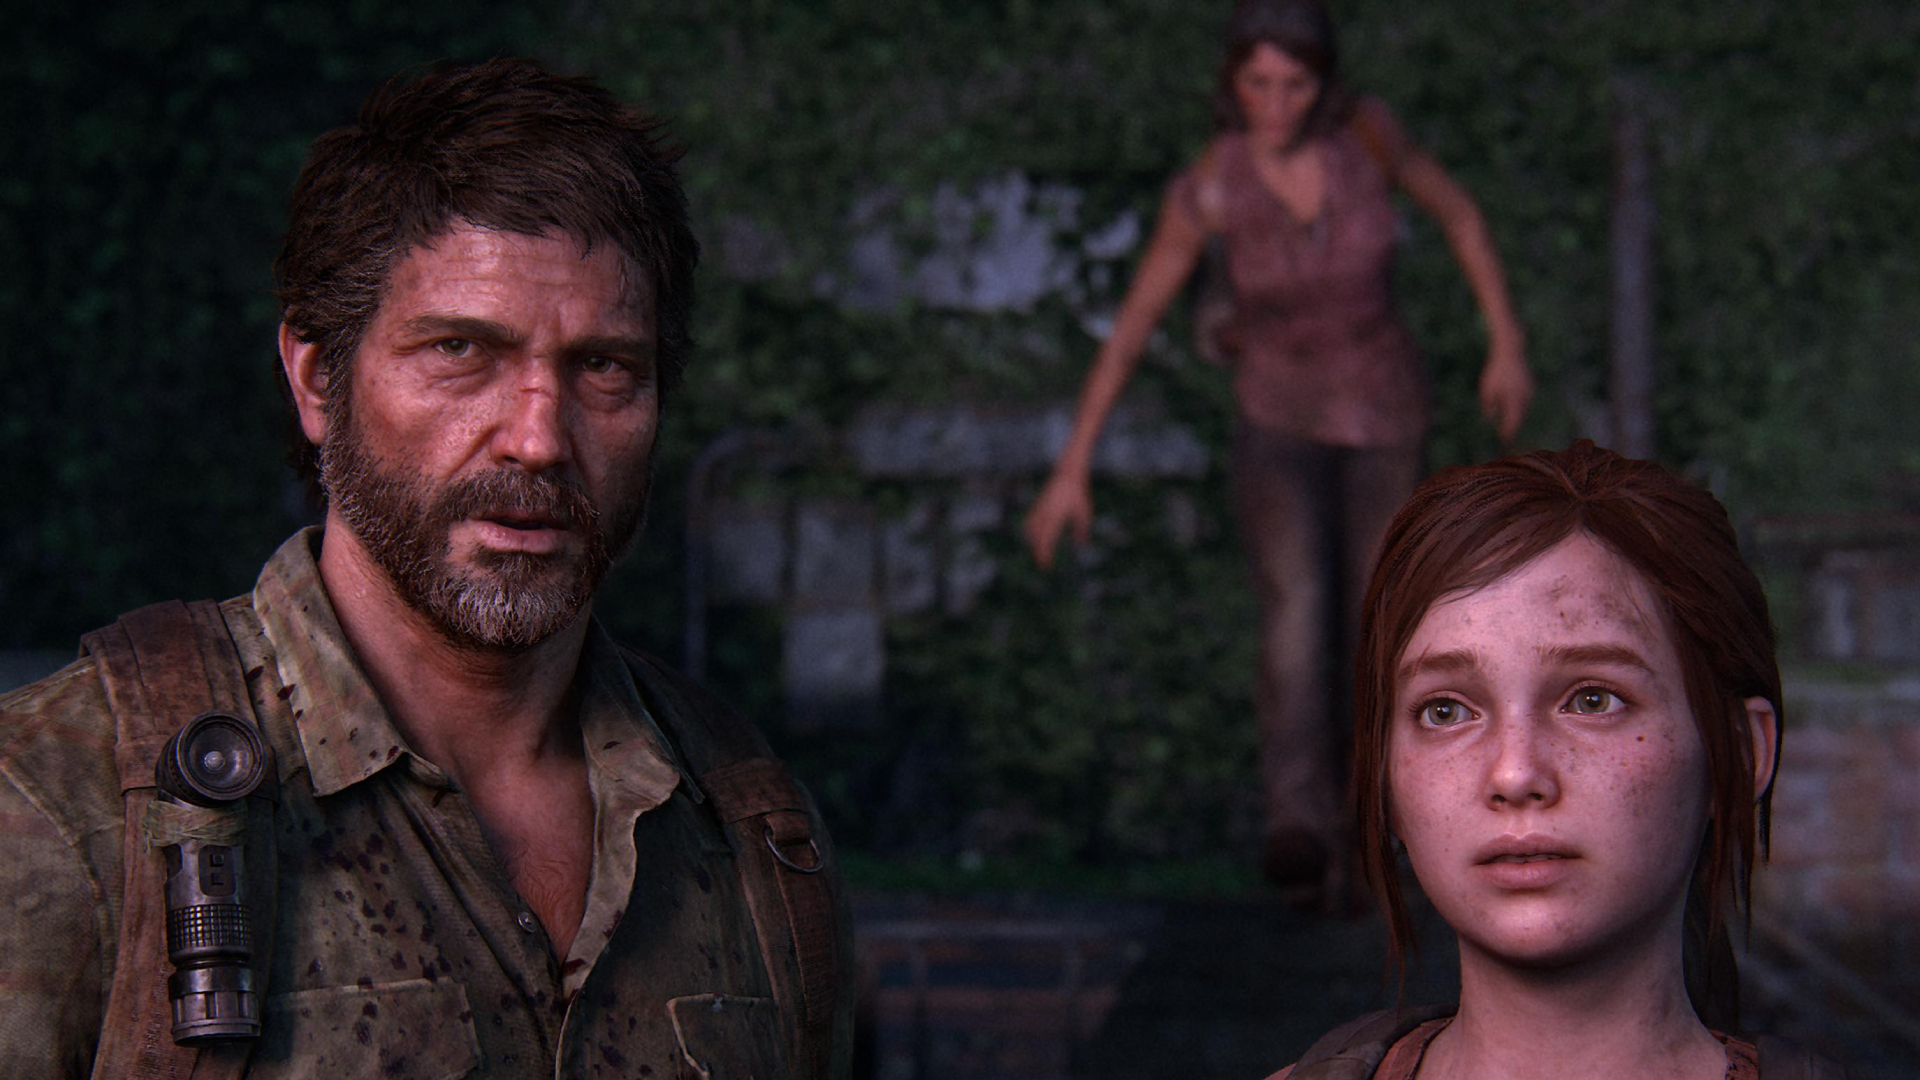 The Last of Us now Steam Deck VERIFIED 